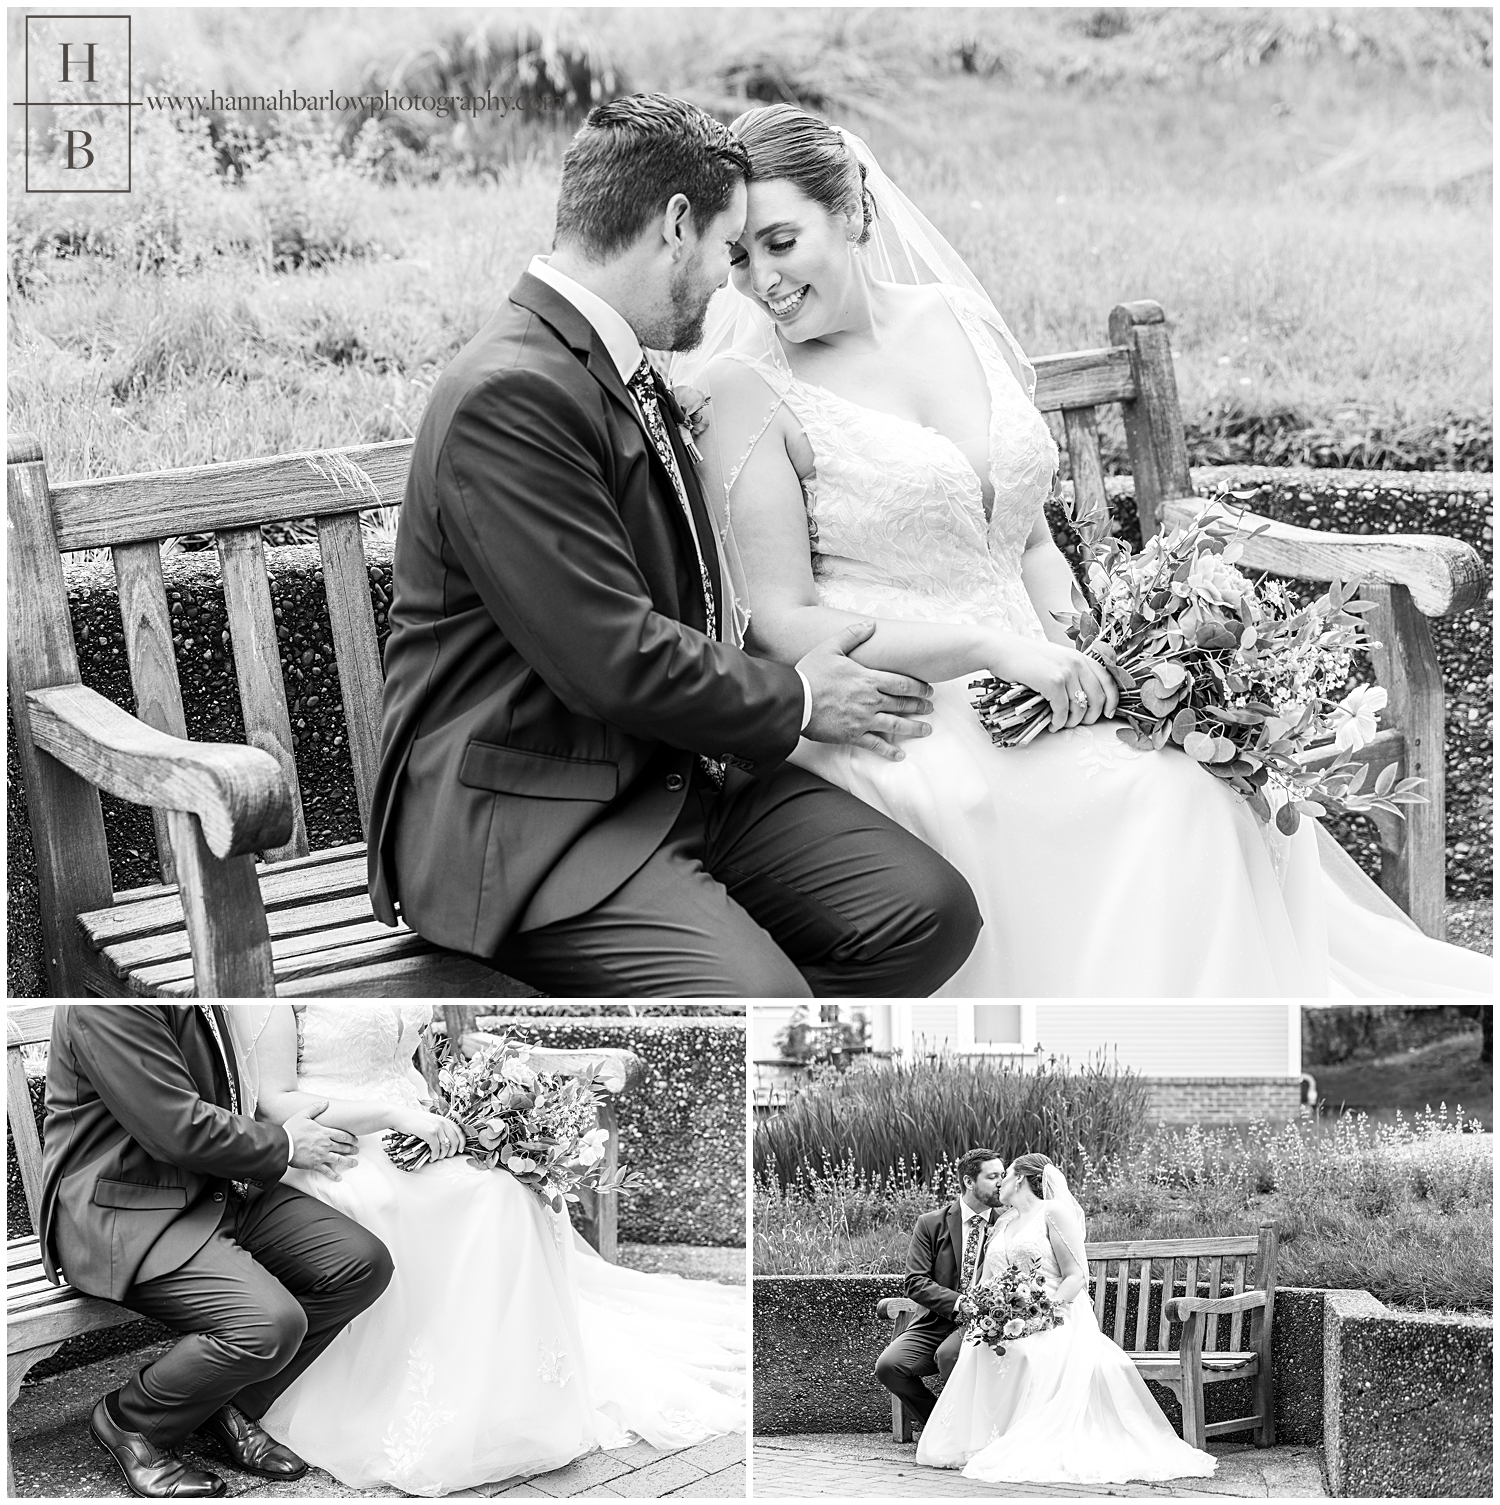 Black and white photos of bride and groom sitting on bench for wedding portraits.